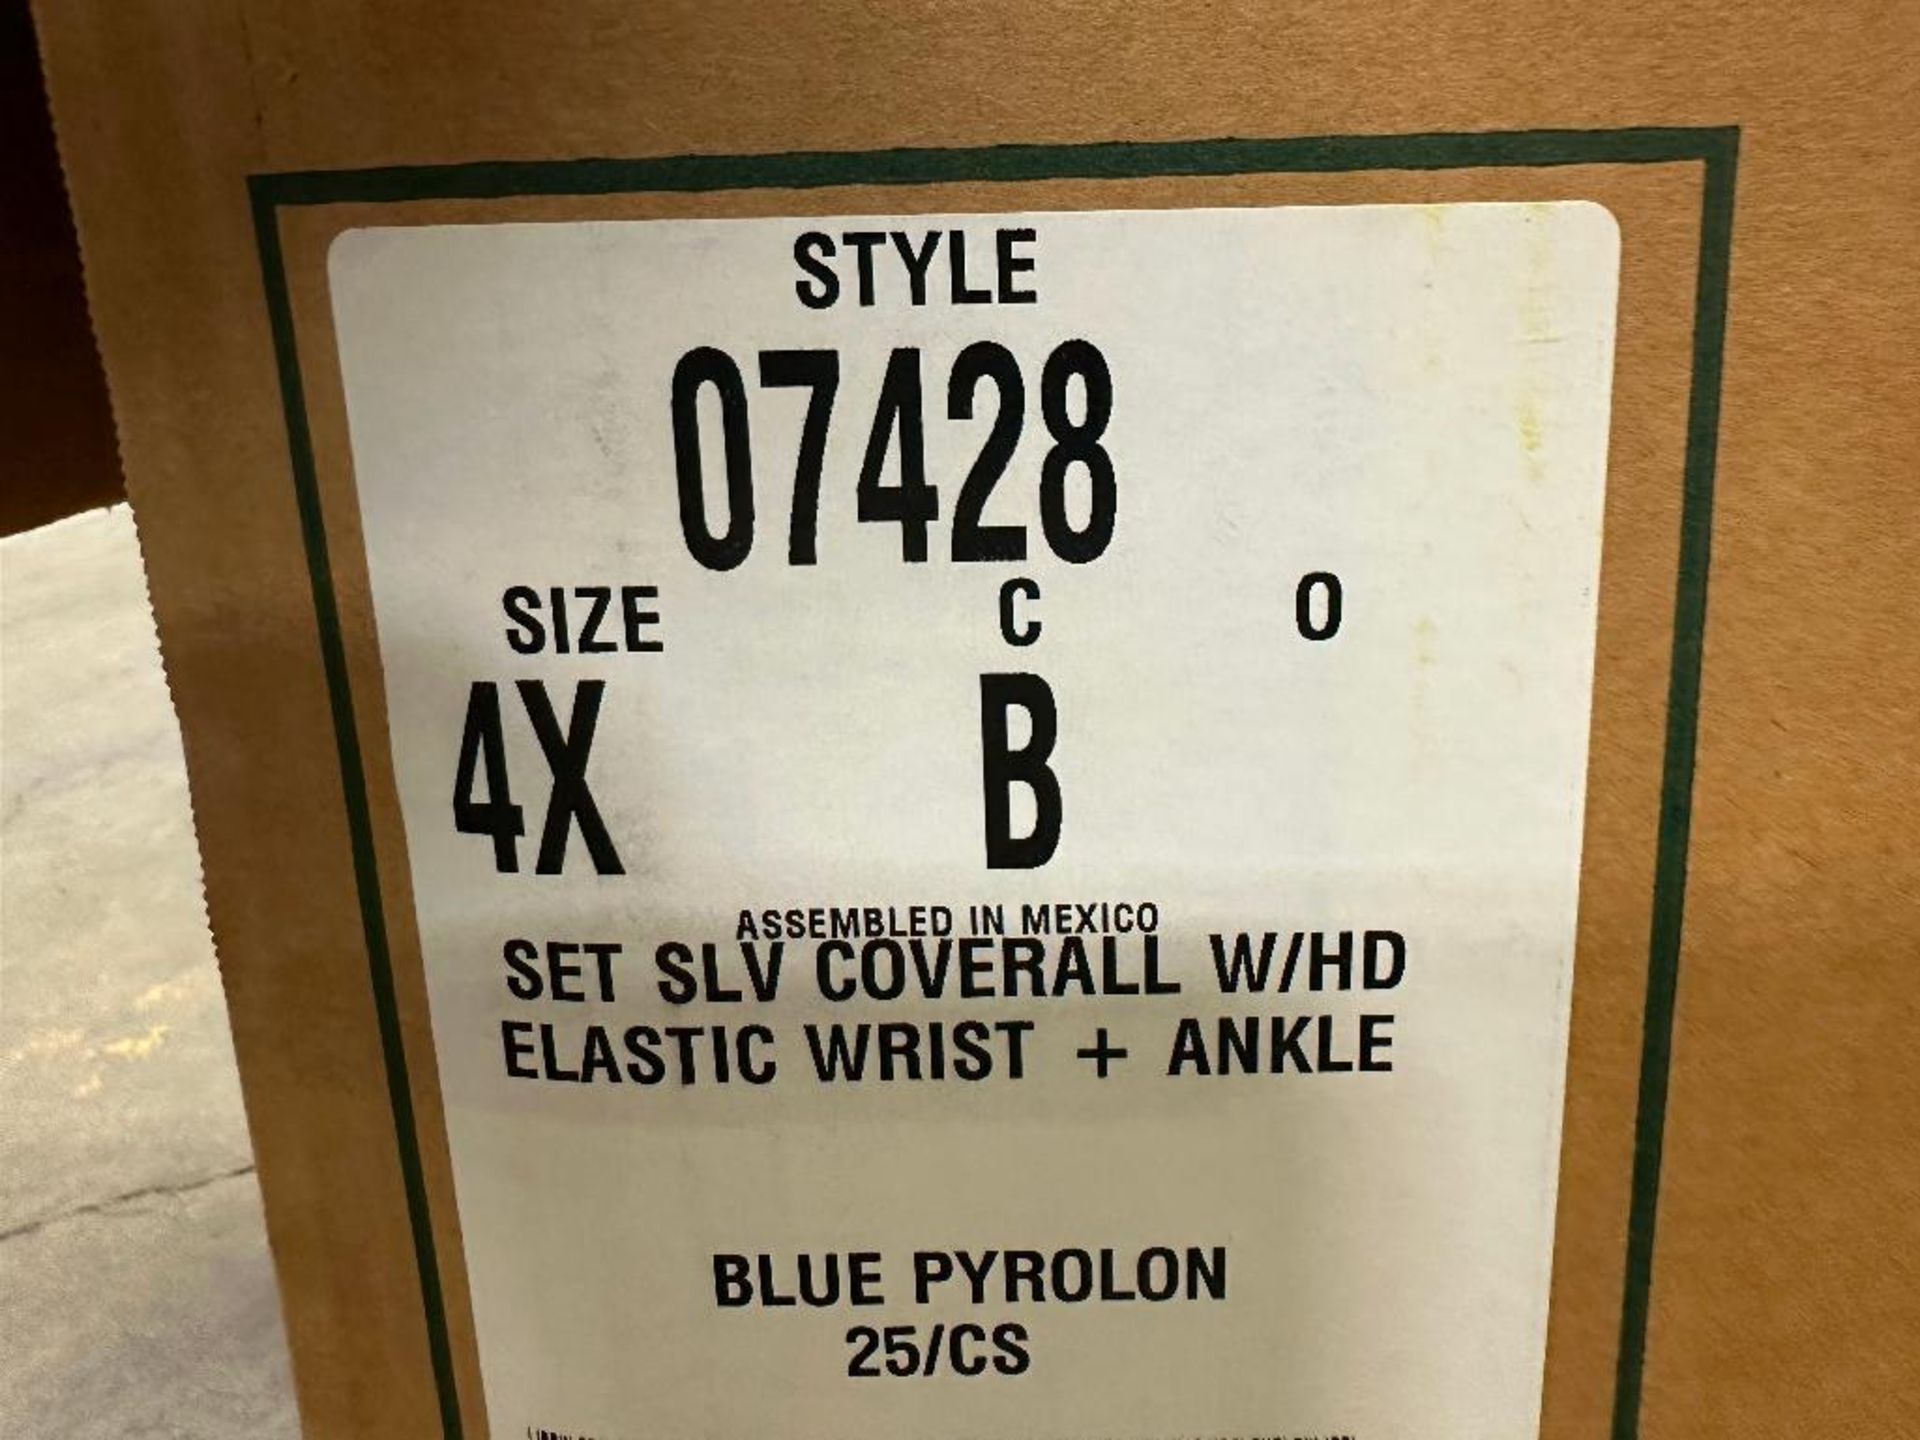 Box of XL Tyvek Disposable Coveralls - Image 3 of 3